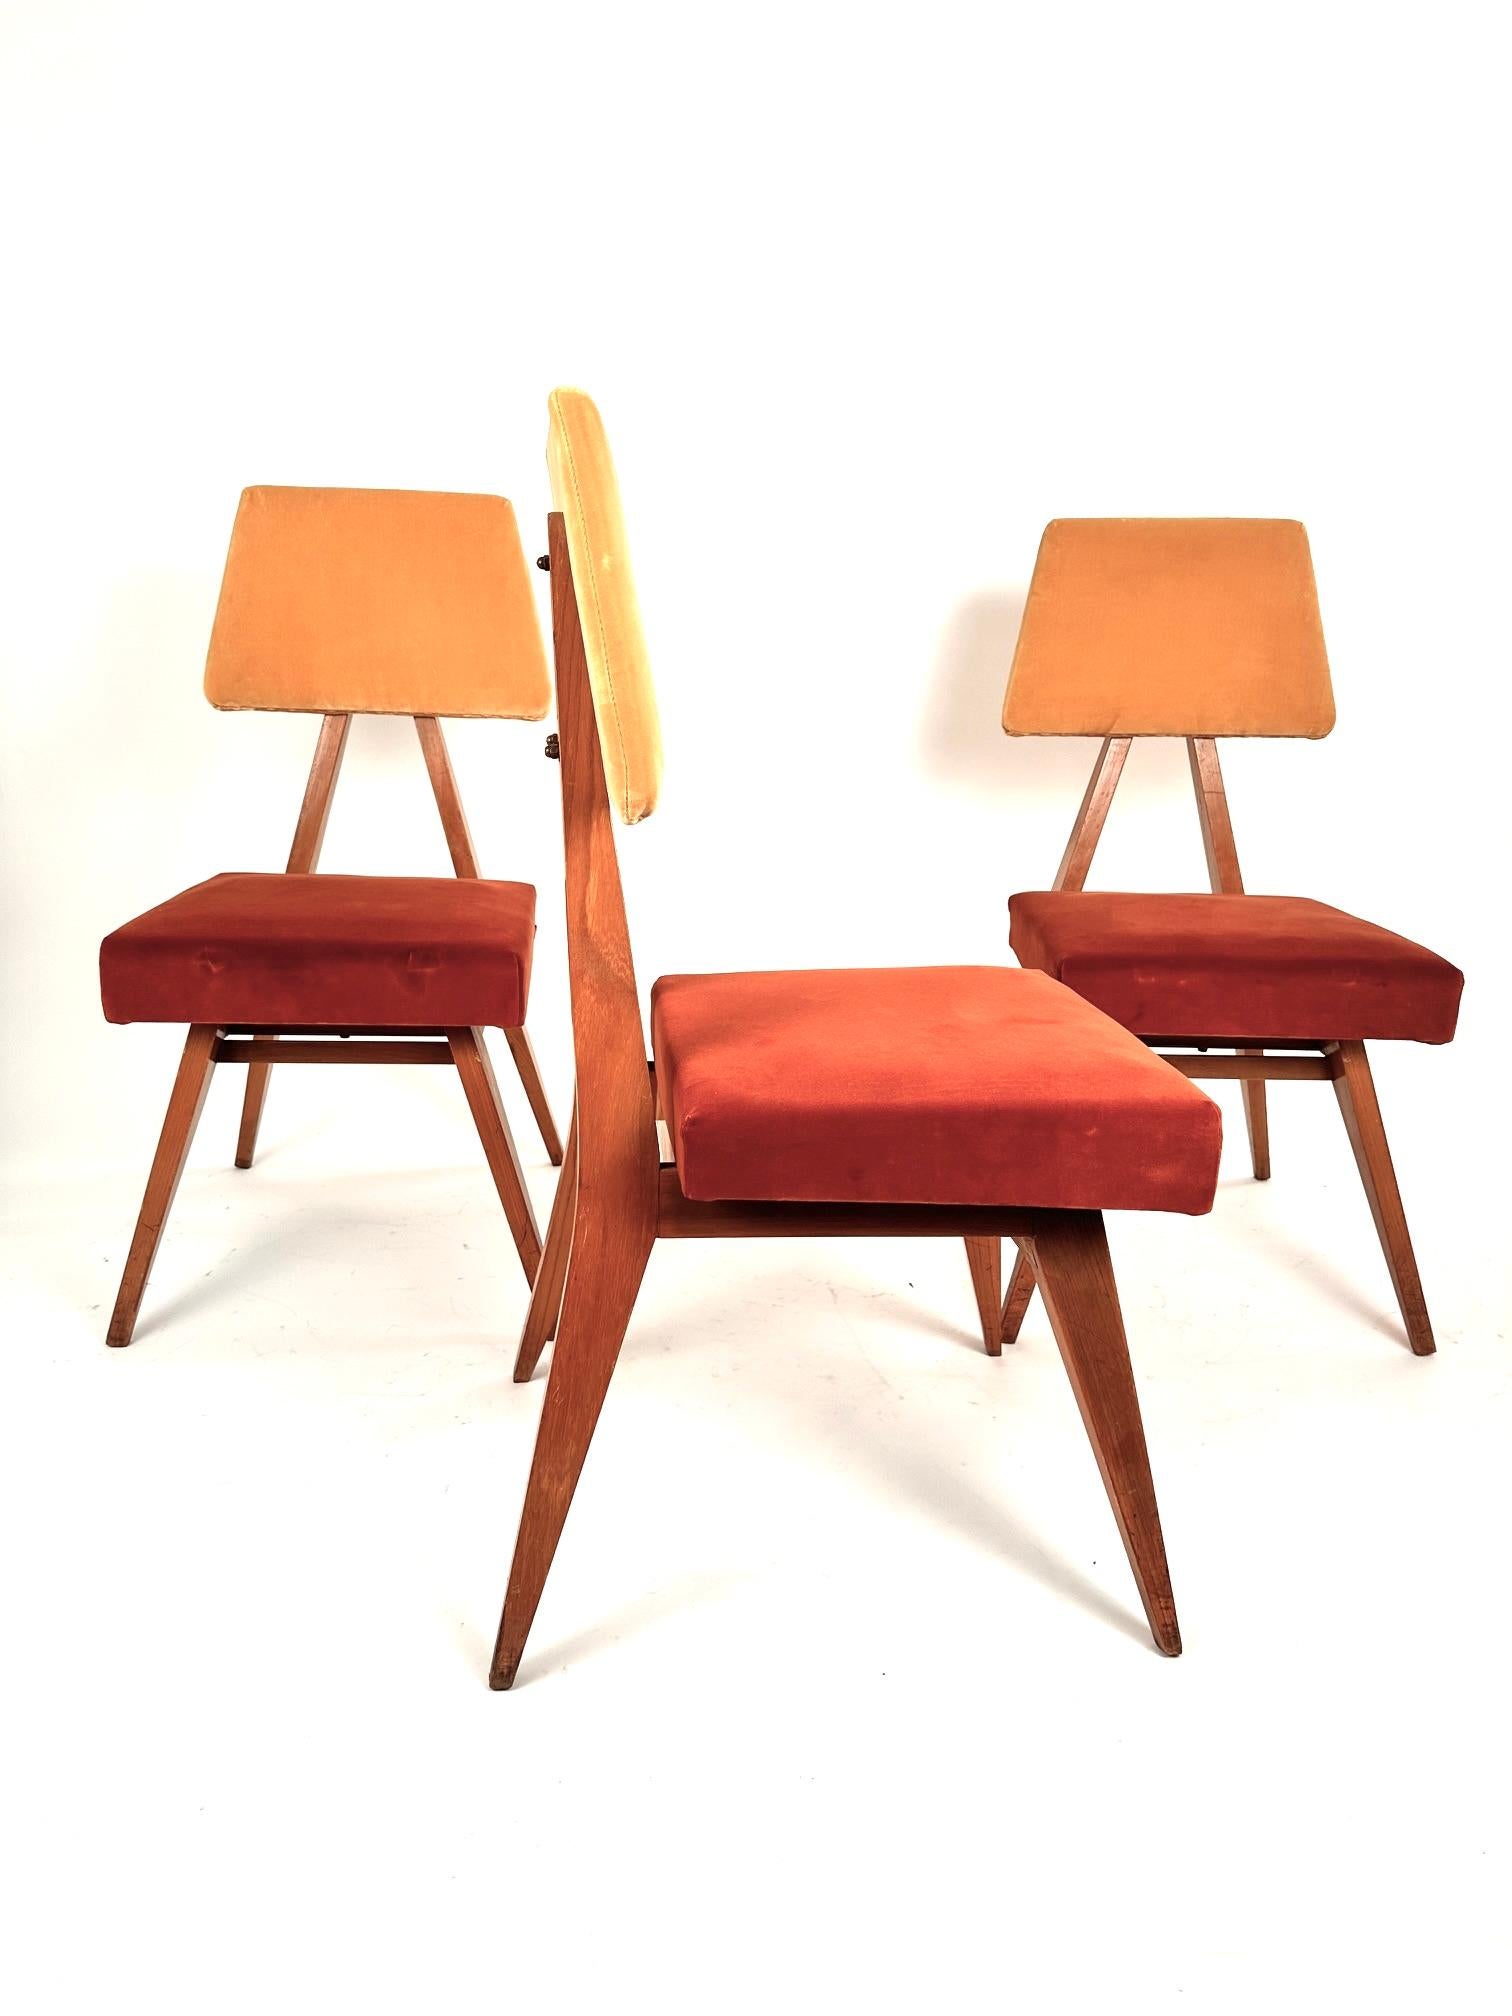 A rare set of Mid-Century Modern Italian dining  chairs designed by the Torino School in the 60s . The wood structure is a triangular frame on which lays a trapezoid back rest. Fine Italian manufacture.Reupholstered on Italian dark yellow and orange